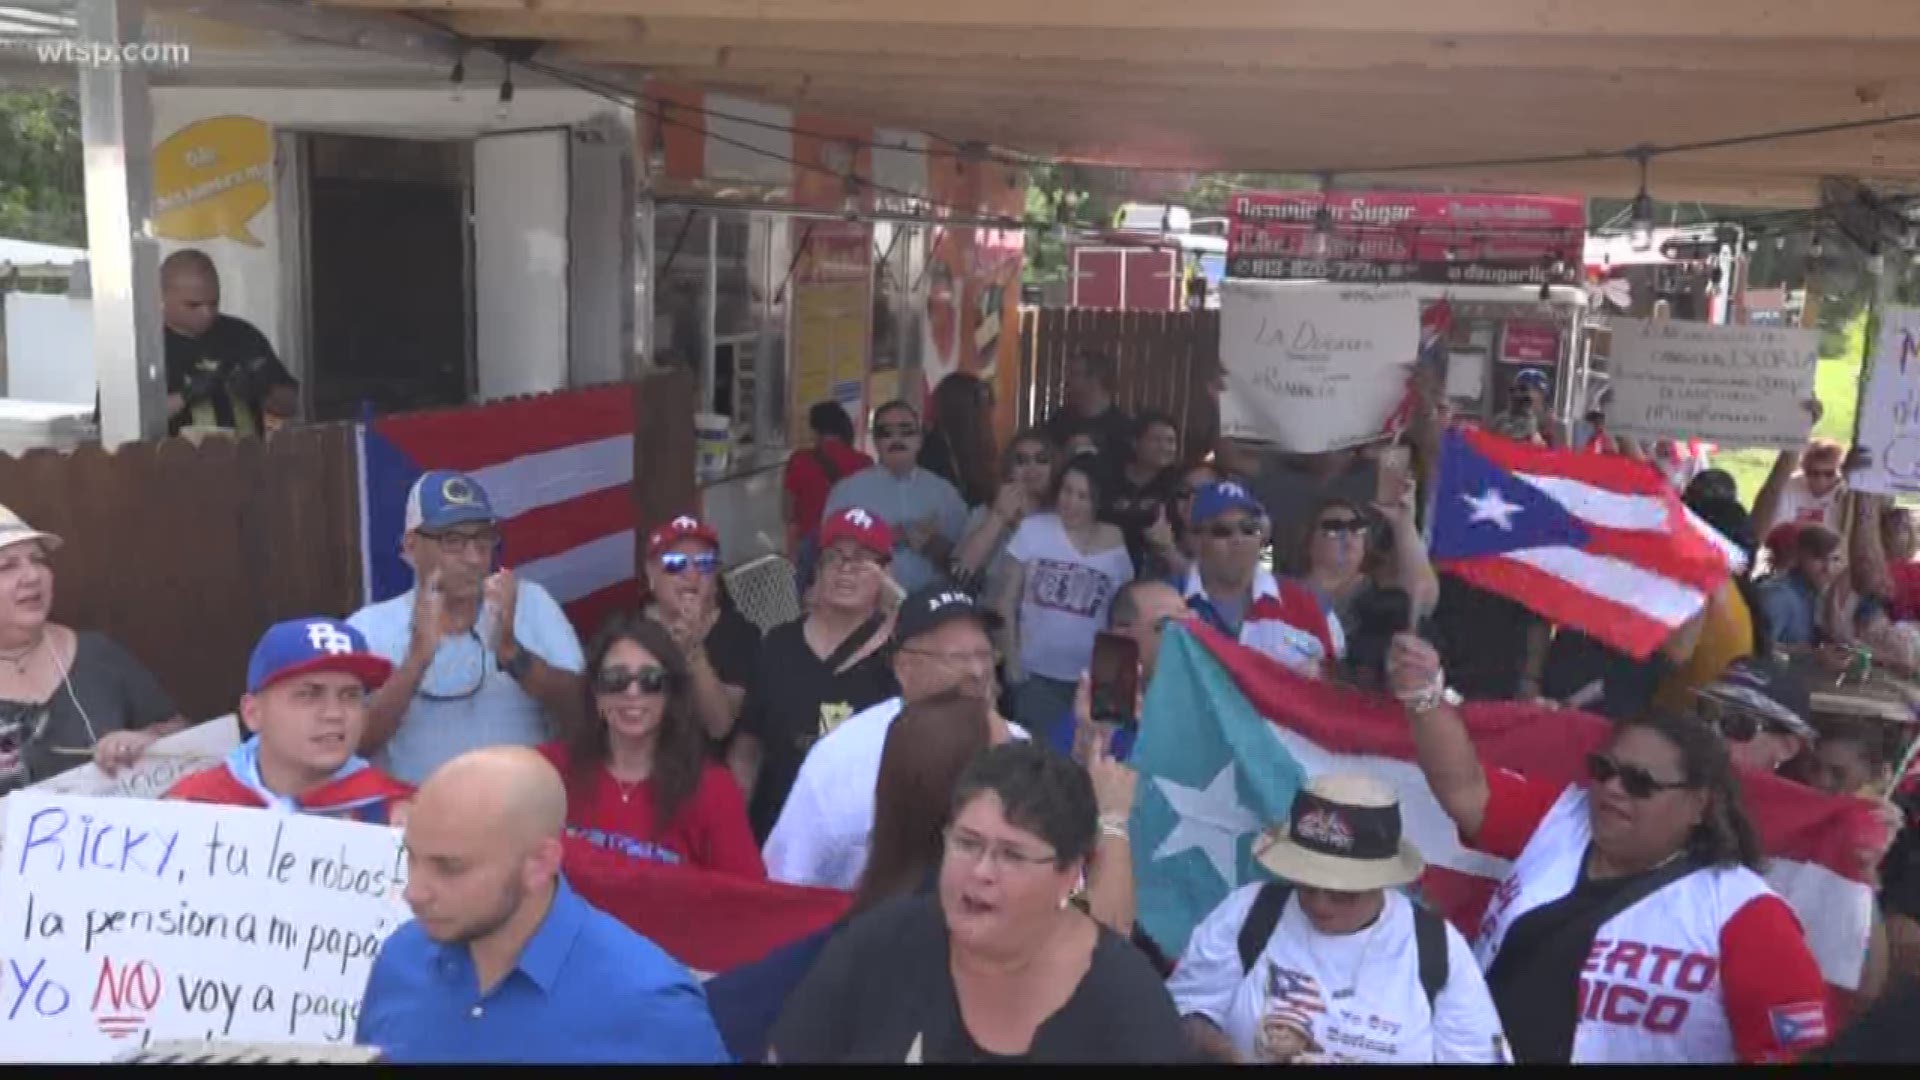 Protests in Puerto Rico raged on into the seventh day, and on Friday hundreds of locals gathered at Tampa restaurant La Fritanga de Tonita to support Puerto Ricans and demand its governor, Ricky Rossello, step down immediately.

This all started on Saturday after the publication of hundreds of pages of chats among the governor and his officials.